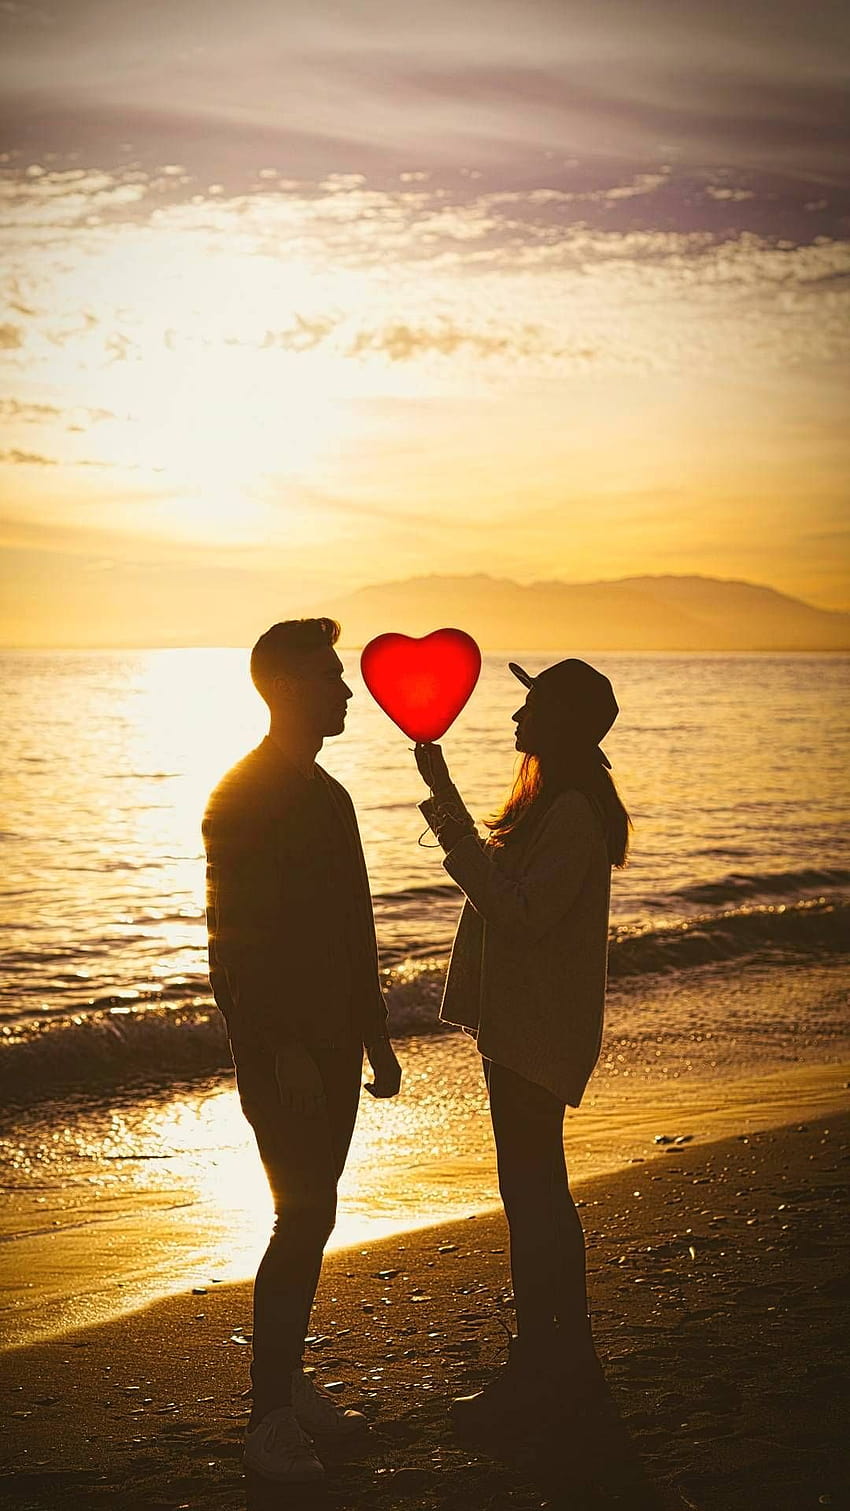 Couples in Sunset 1080X1920, love couple full screen HD phone wallpaper